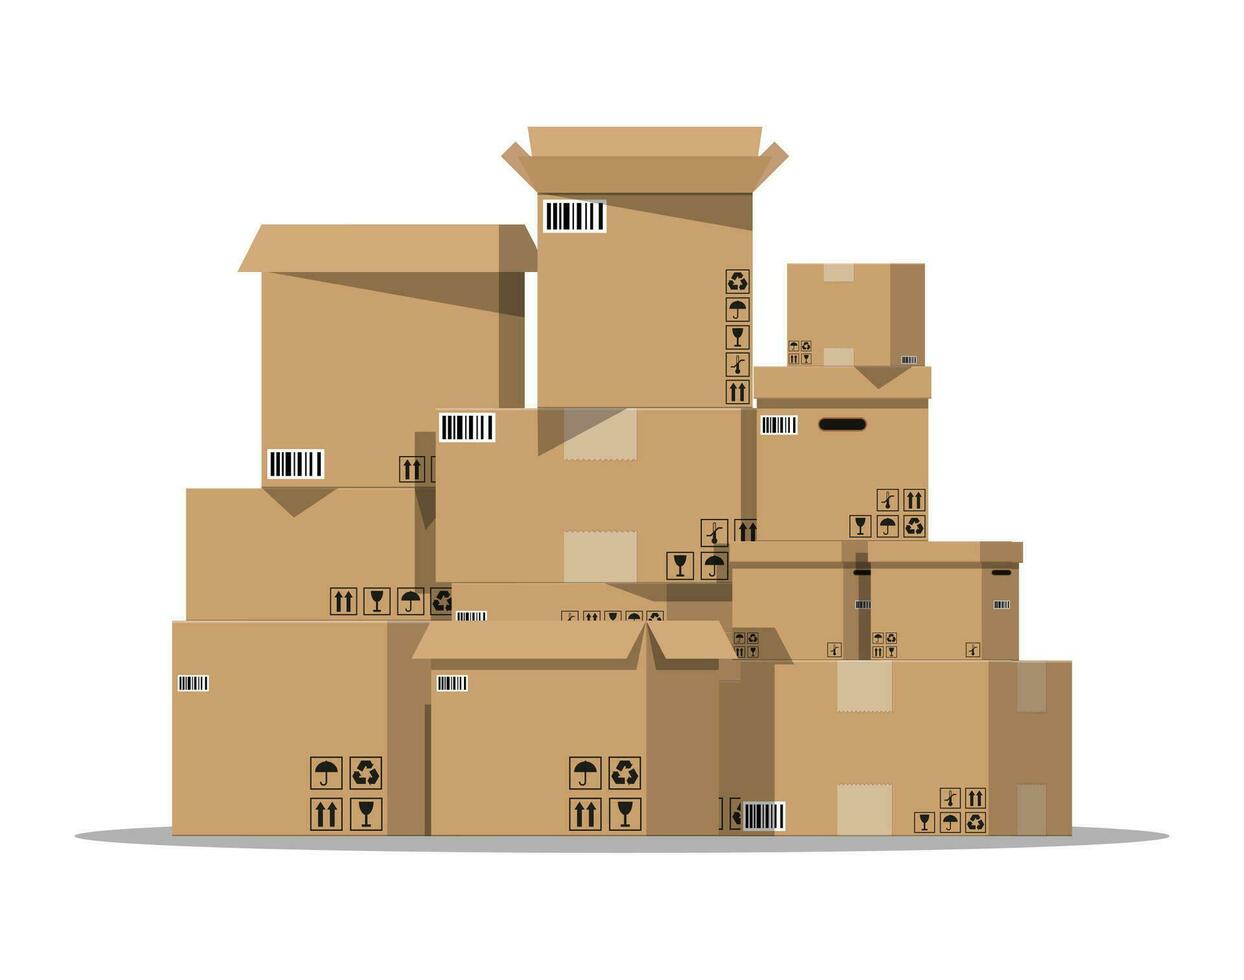 Pile cardboard boxes set. Carton delivery packaging open and closed box with fragile signs. Vector illustration in flat style